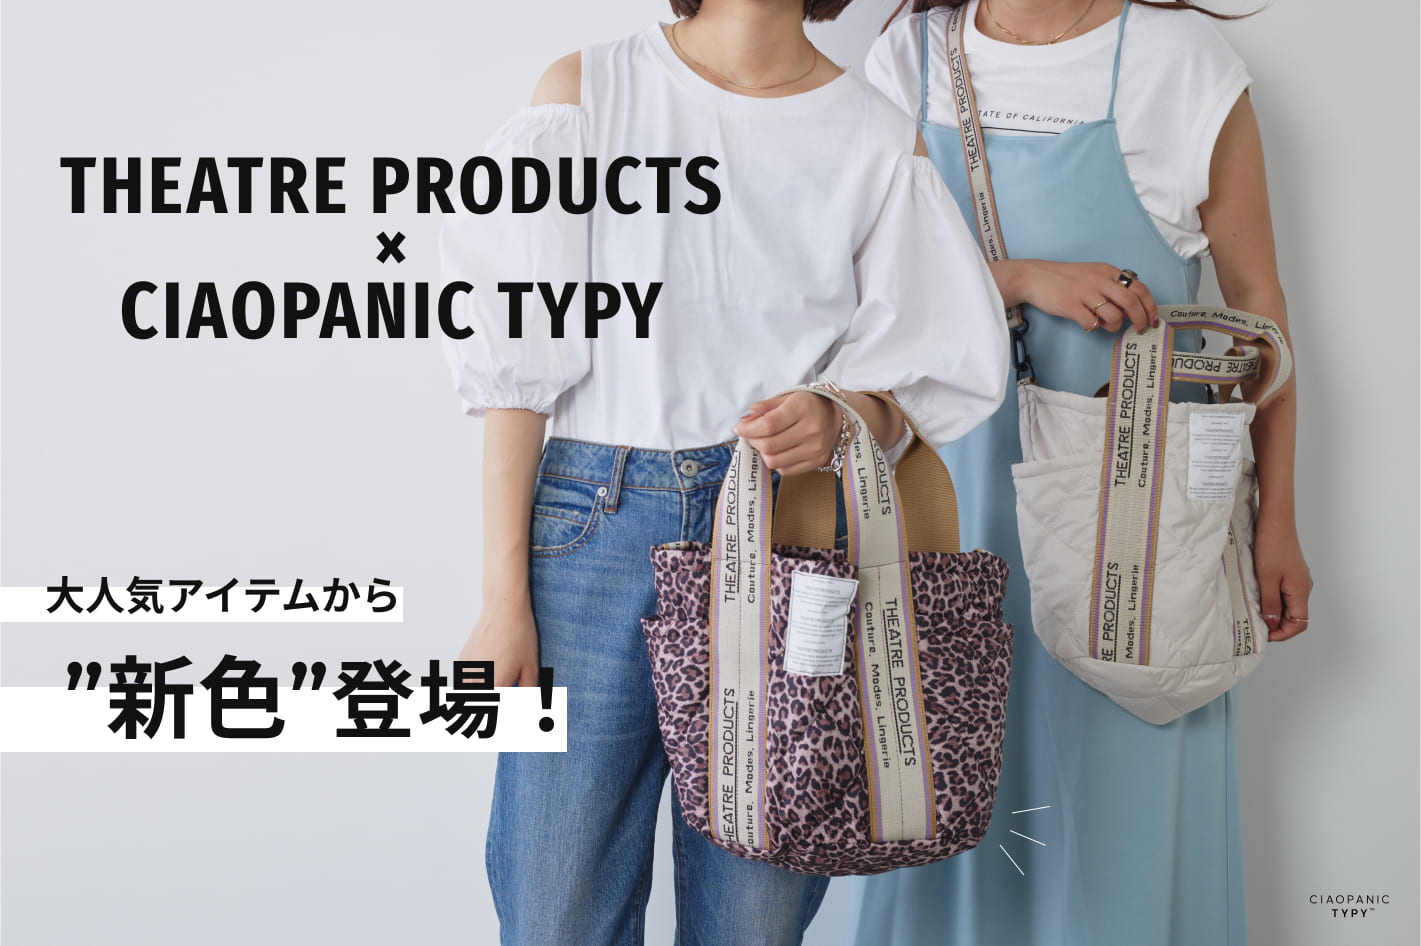 CIAOPANIC TYPY ◇NEW COLOR◇大人気シアタープロダクツから新色が登場！